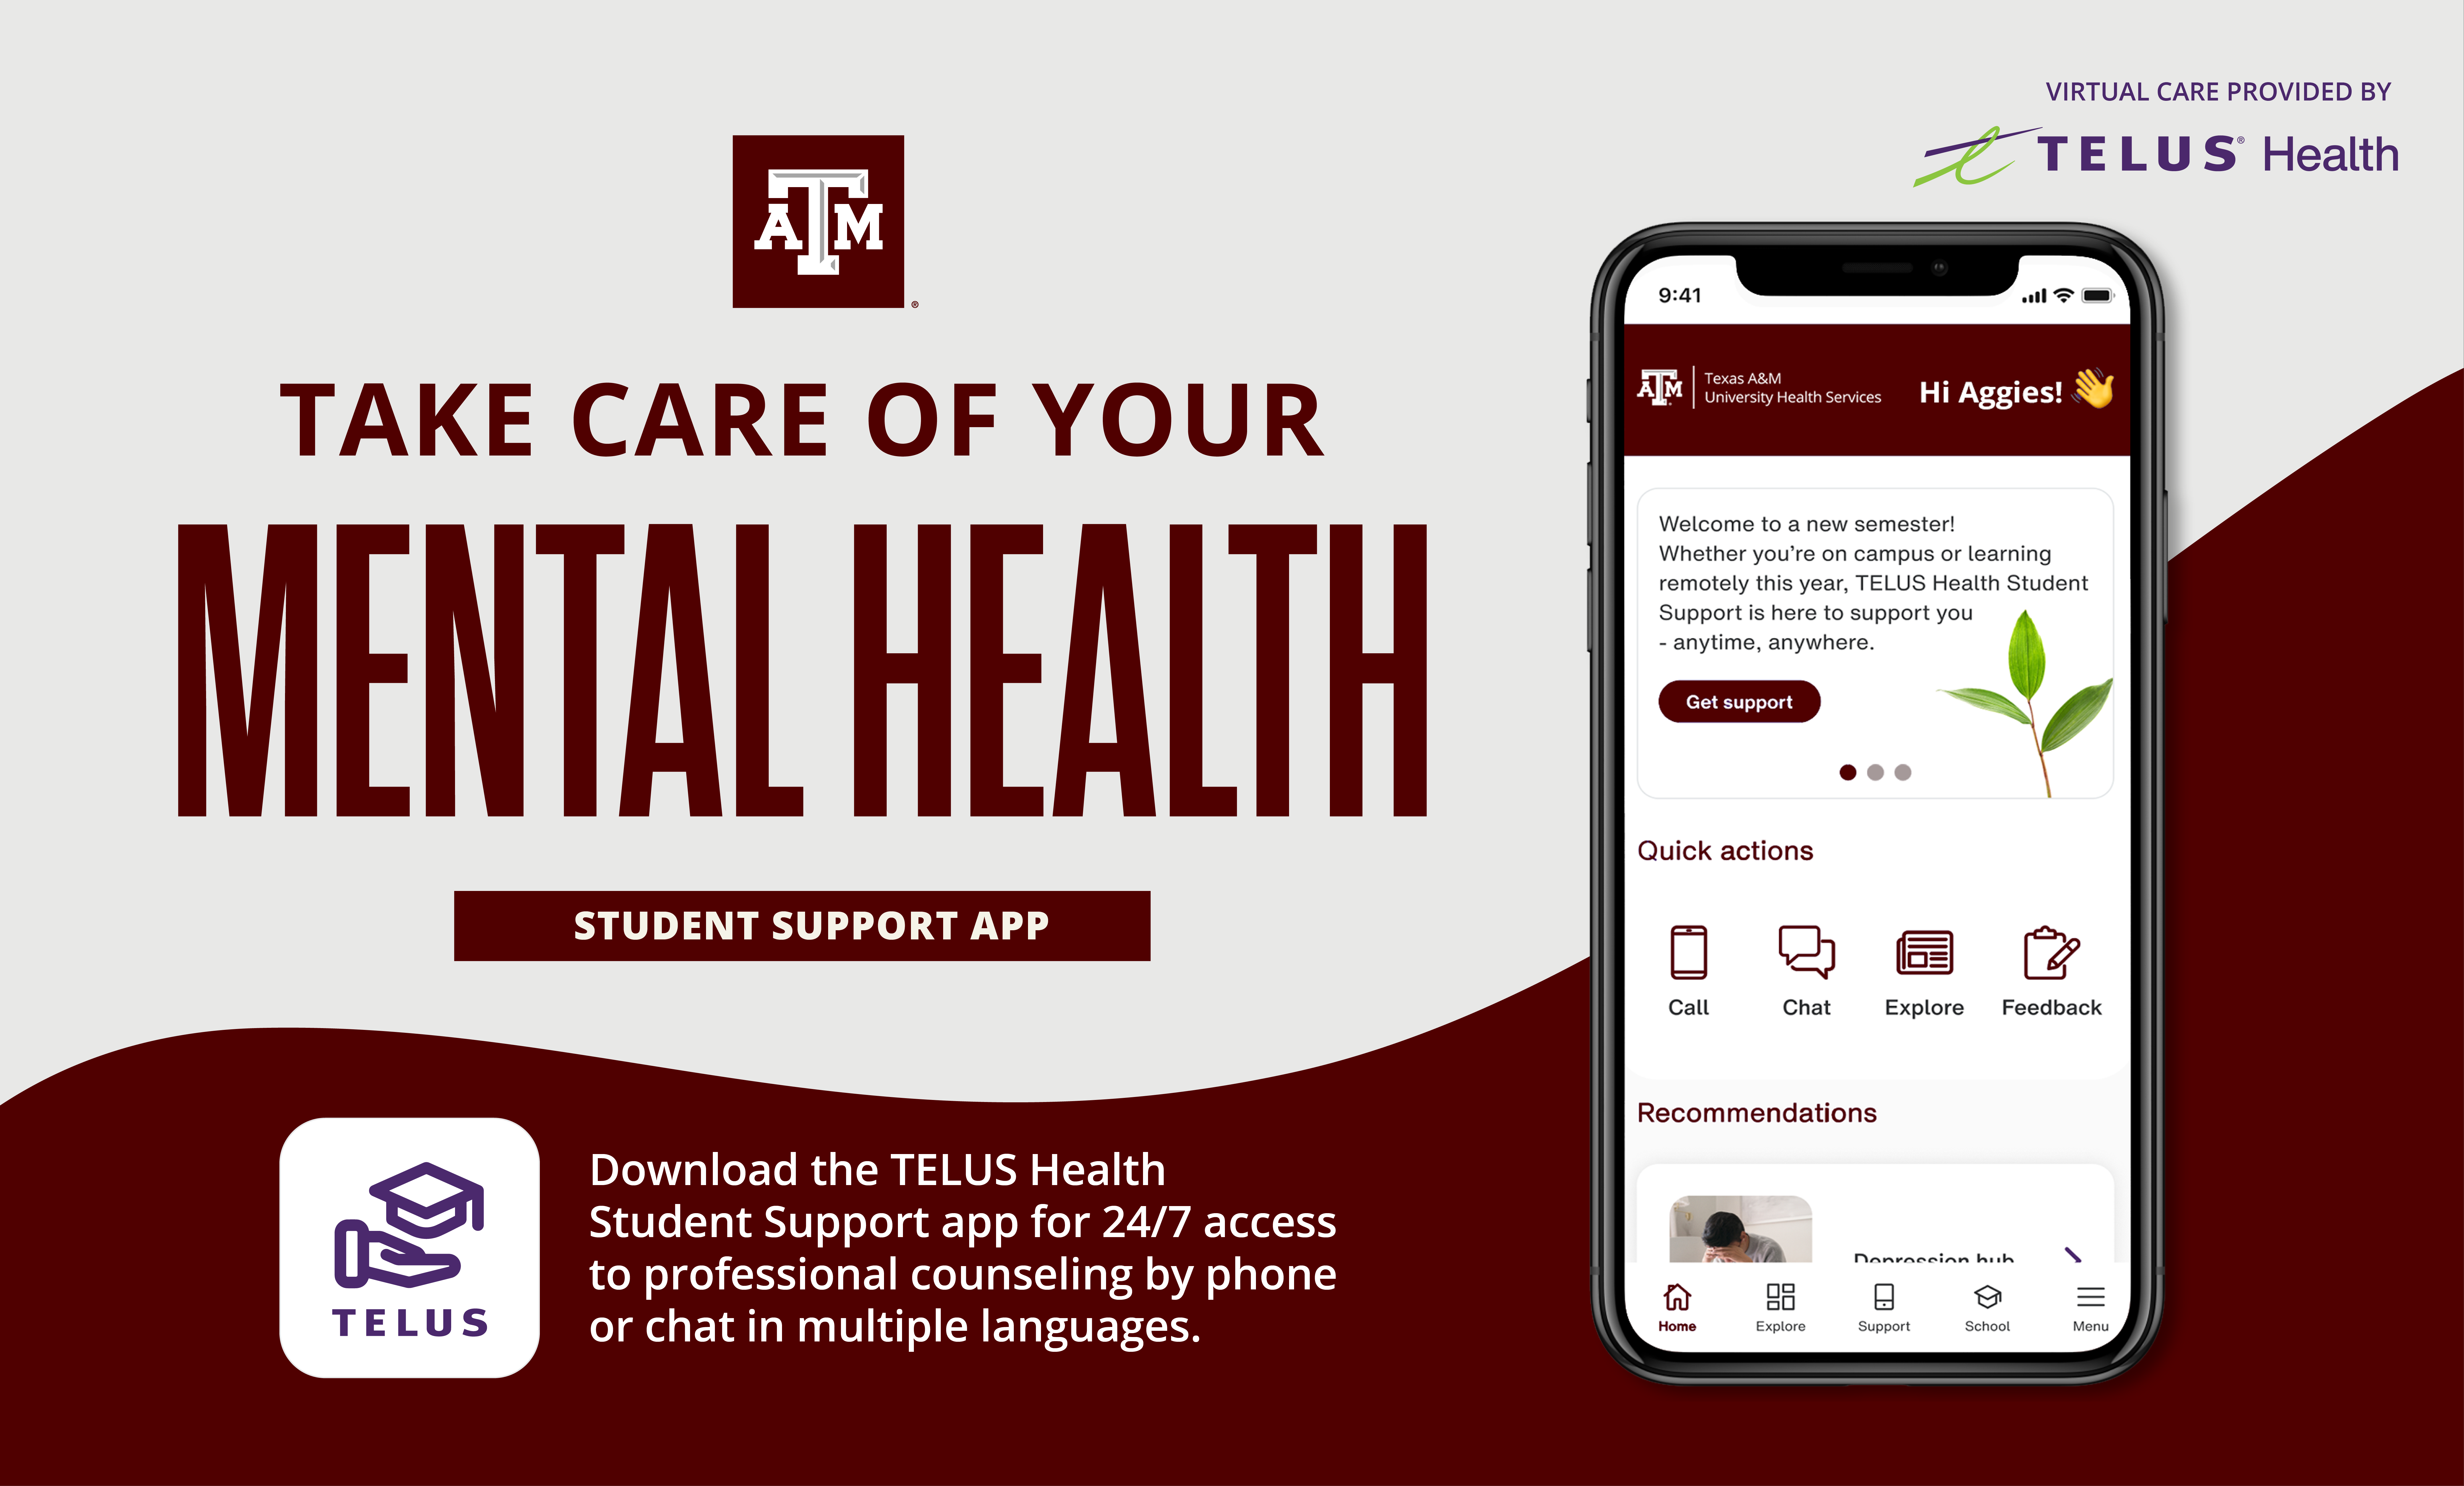 Take care of your mental health with the TELUS Health Student Support app. Download for 24/7 24/7 access to professional counseling in multiple languages.